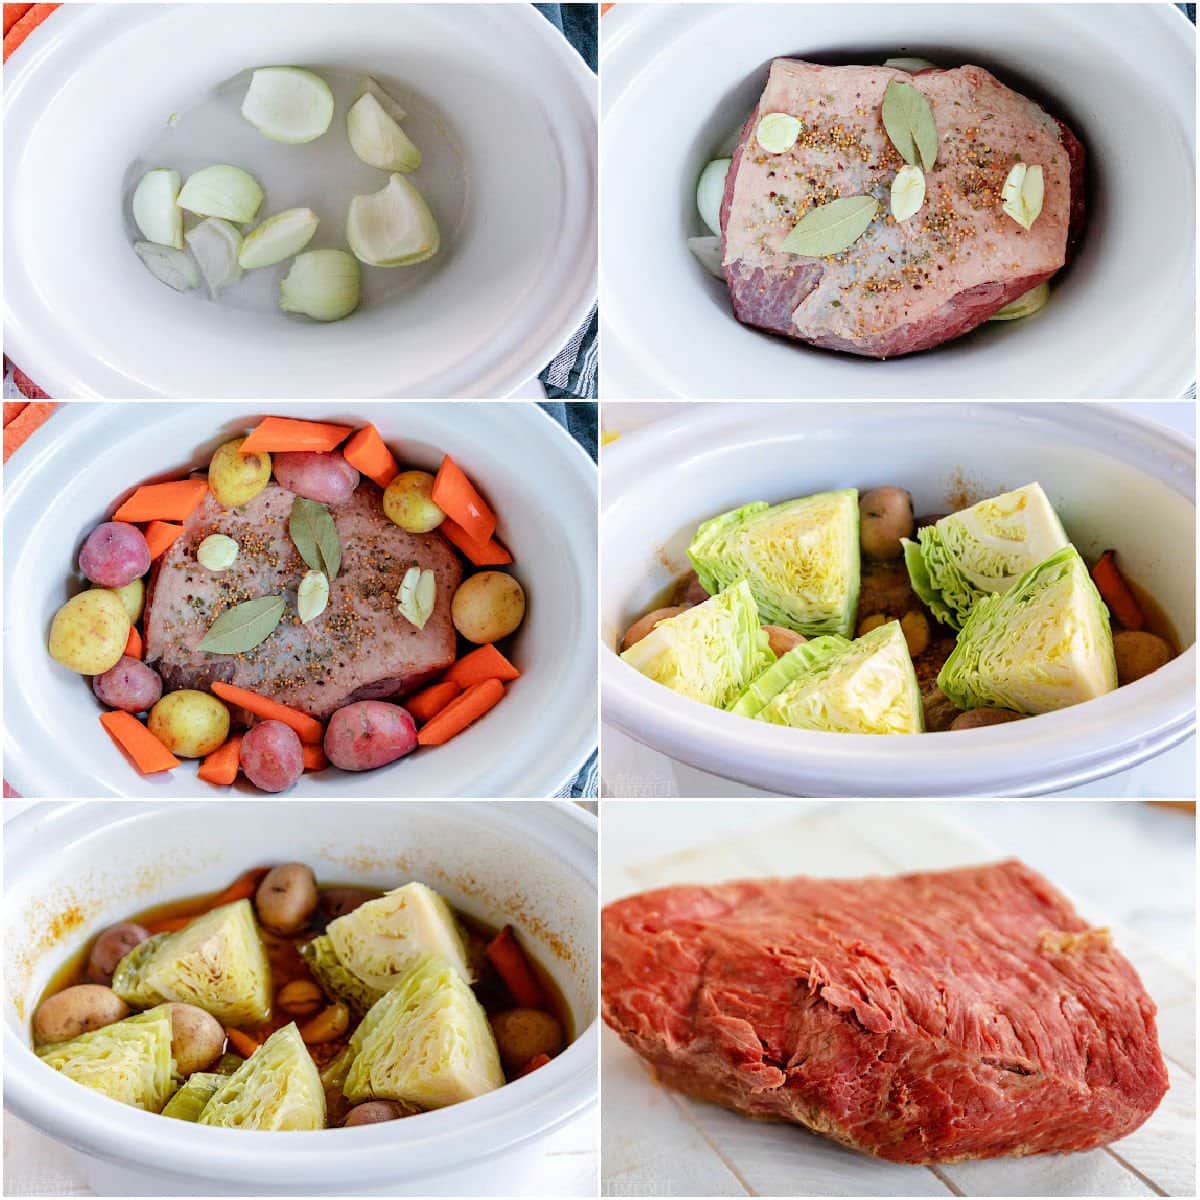 six image collage showing how to cook a corned beef in crockpot.